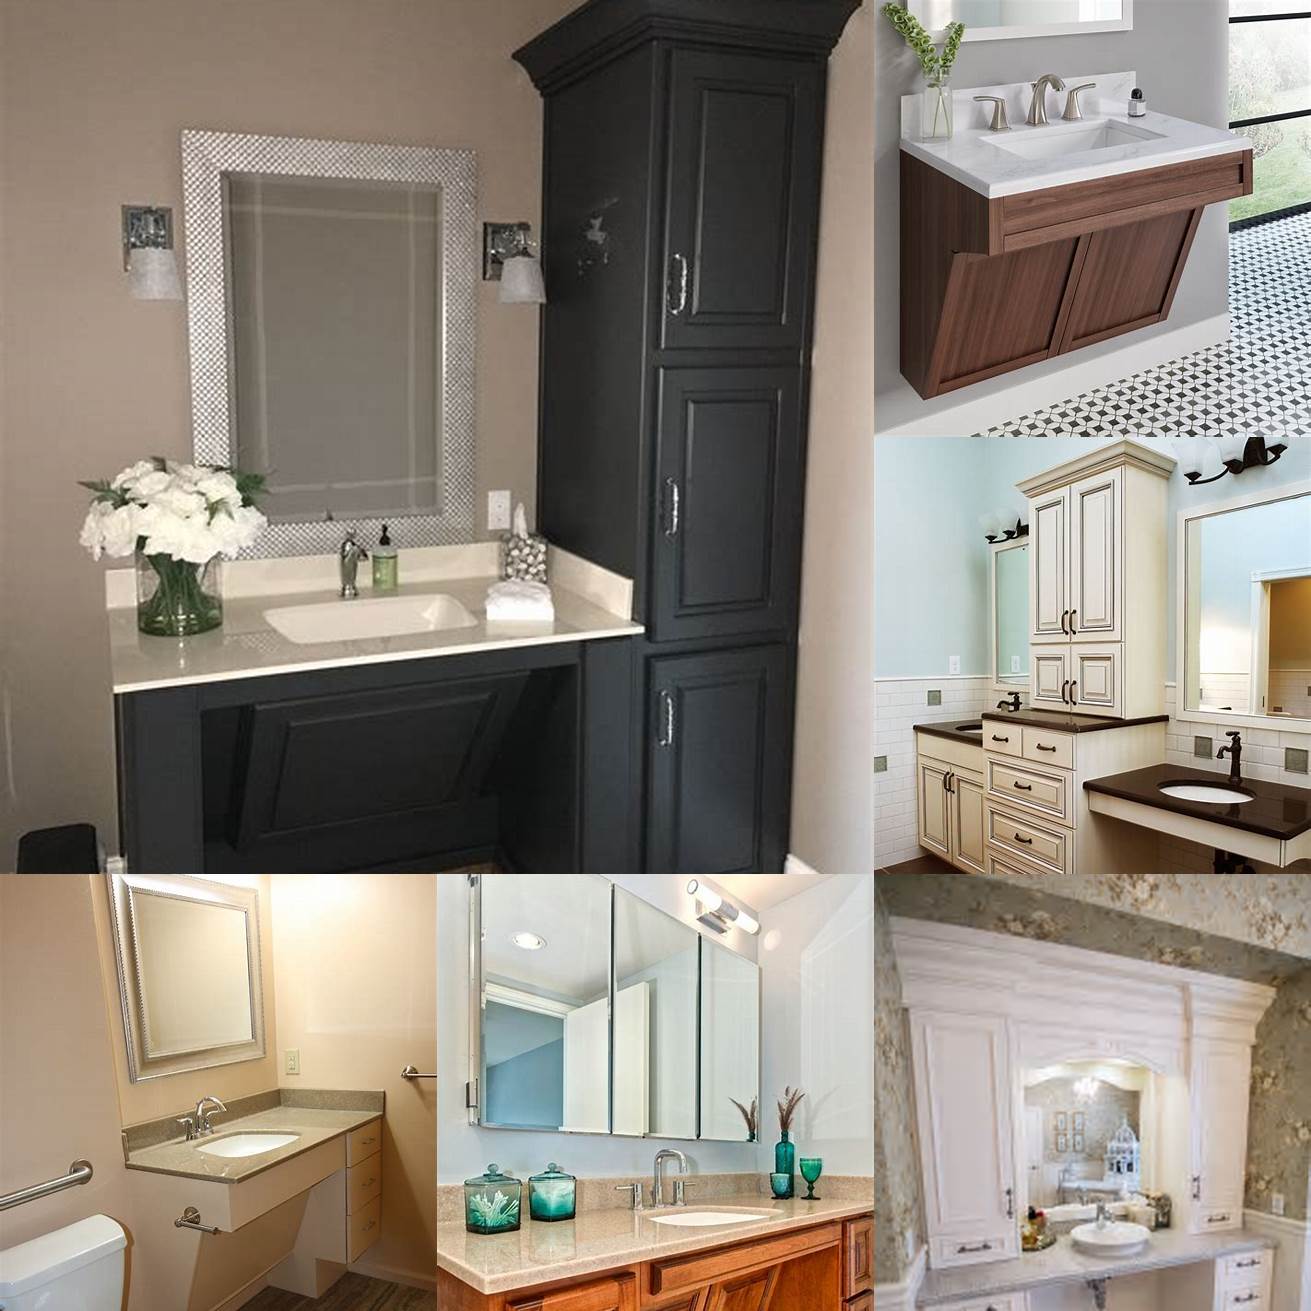 A handicap bathroom vanity with easy access and storage compartments